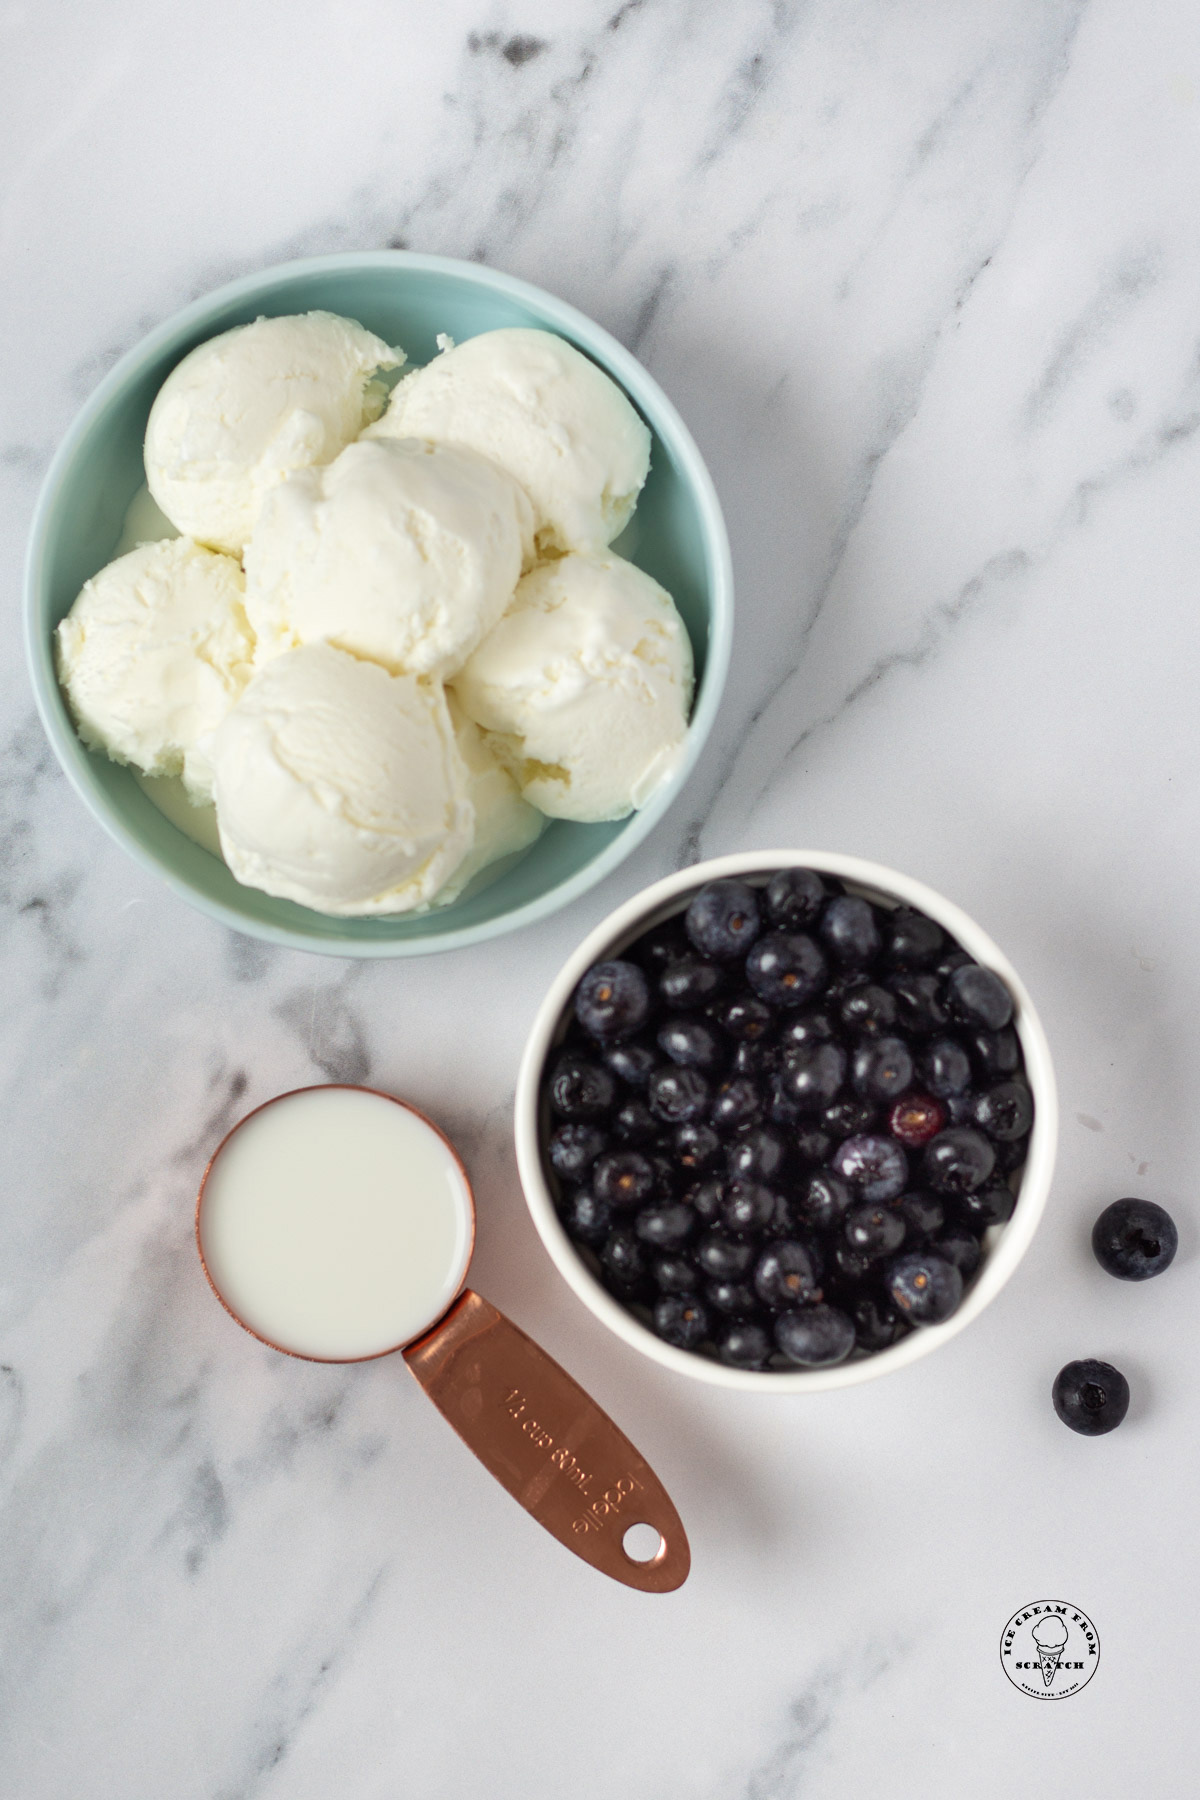 a bowl of scooped vanilla ice cream, a smaller bowl of fresh blueberries, and a measuring cup of milk on a marble countertop